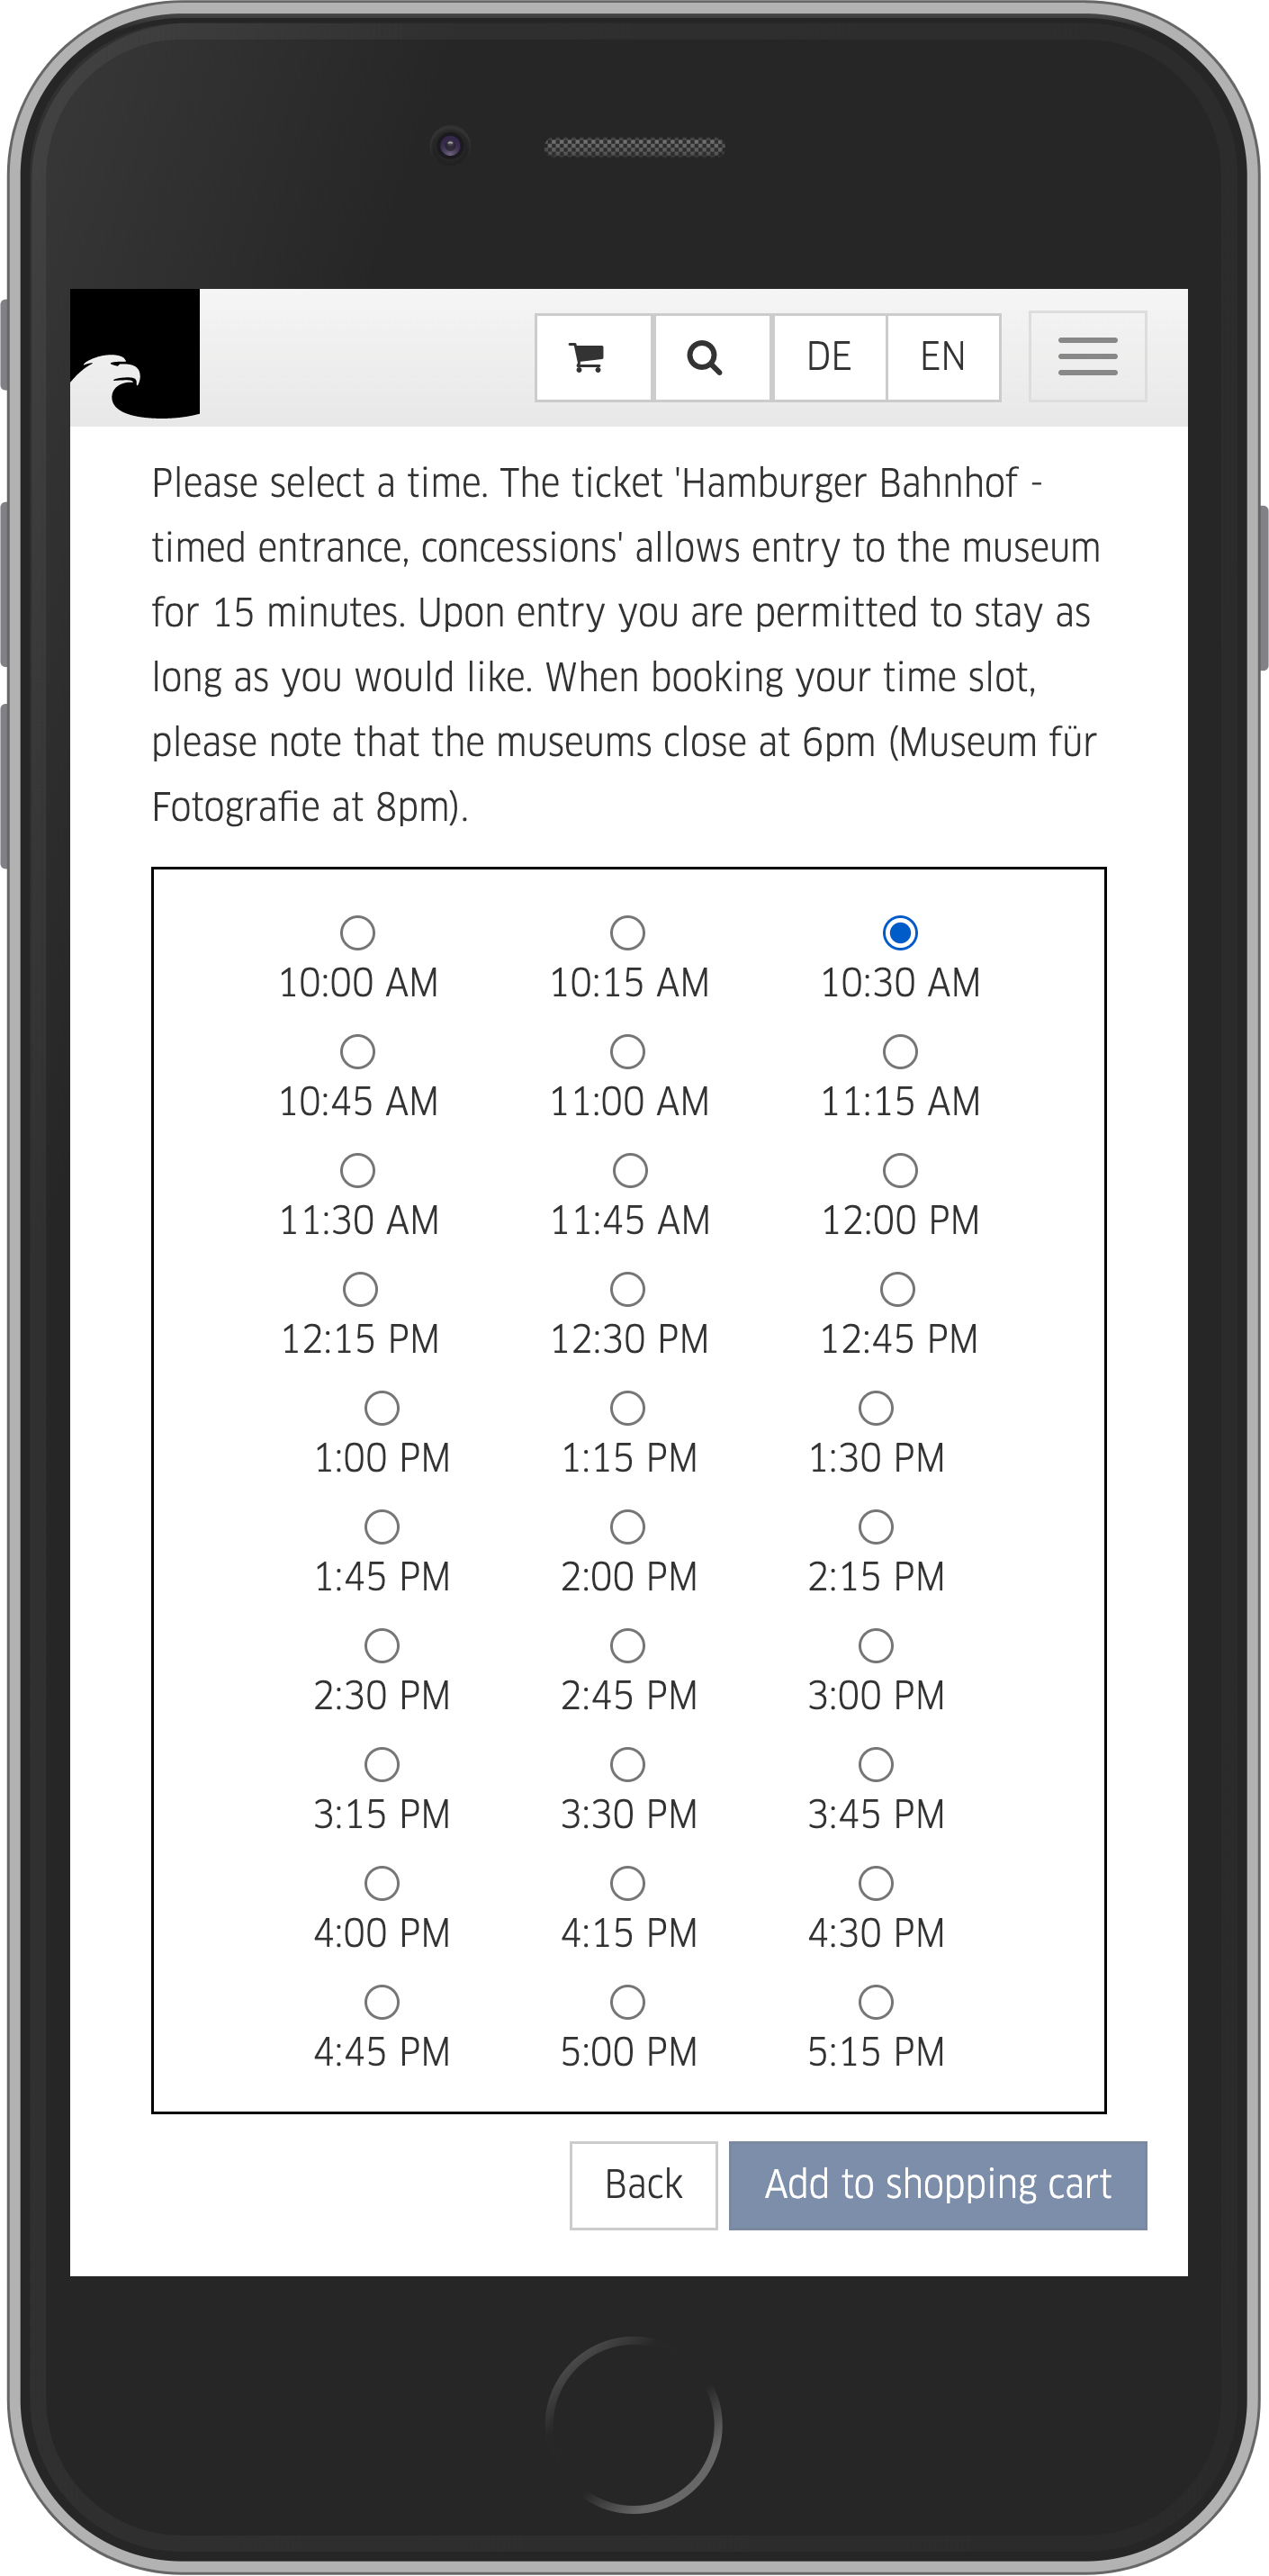 Mobile view of time slot selection in buying process for time slot tickets in online shop of Staatliche Museen zu Berlin (Berlin State Museums)